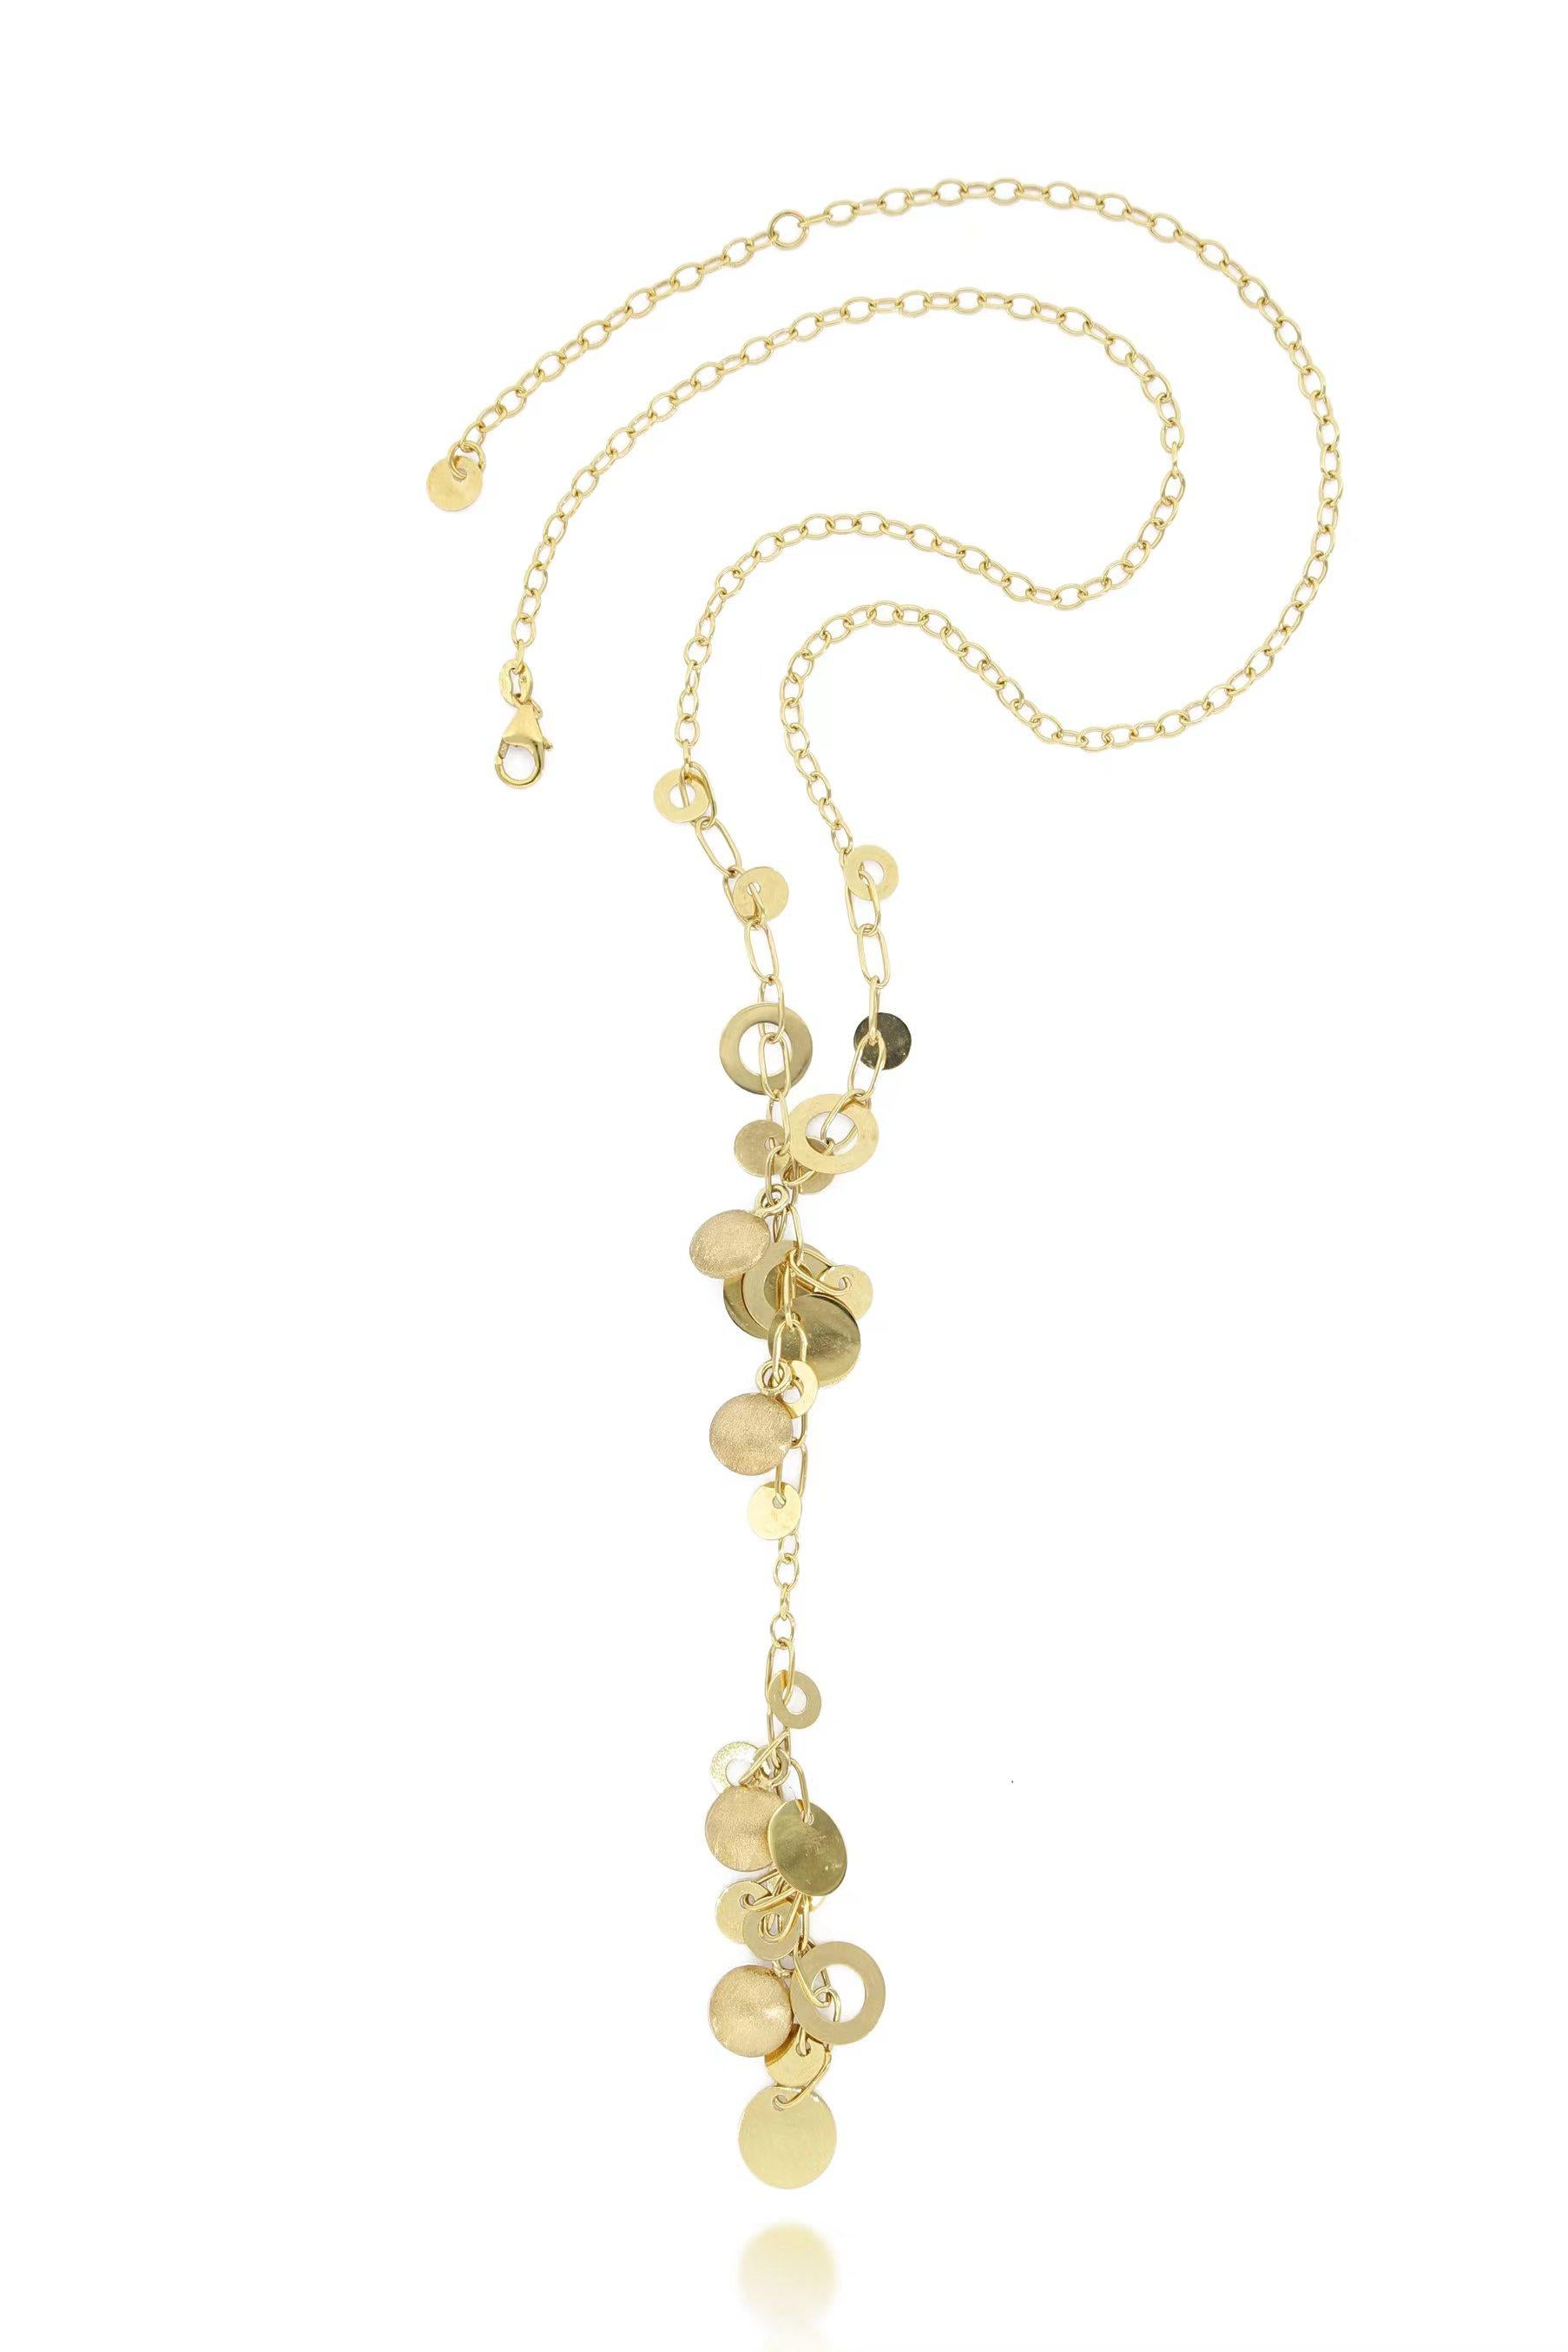 A very nice piece of necklace, designed and made in Italy, decorated with numerous dangling shinny and brushed pieces in 18 karat yellow gold, stylish and trendy.
The company was founded one and a half centuries ago in Macau. The brand is renowned